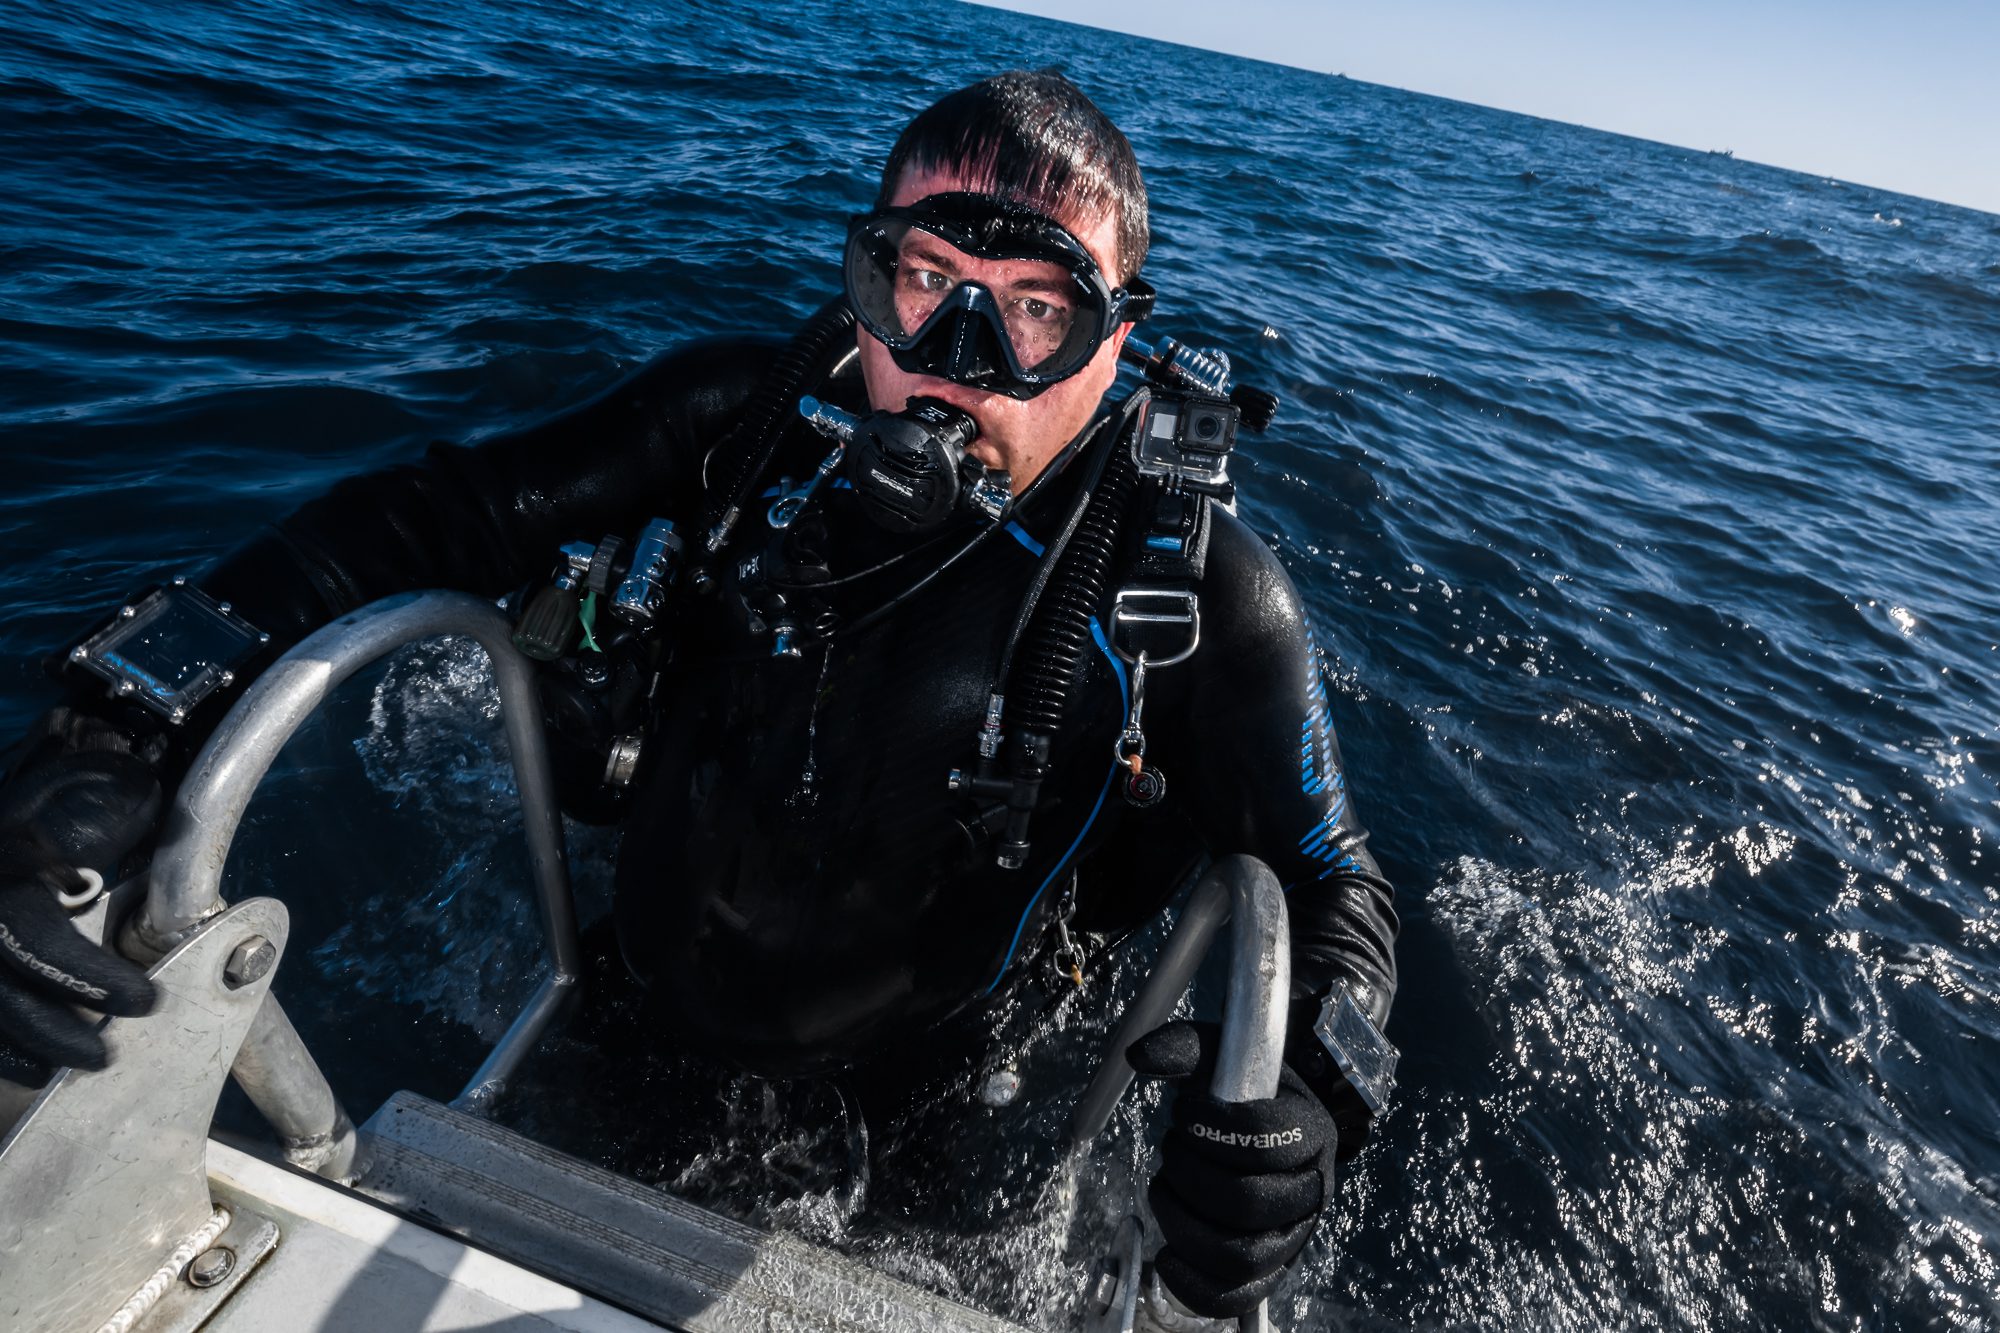 This man helped open the ocean to Black divers